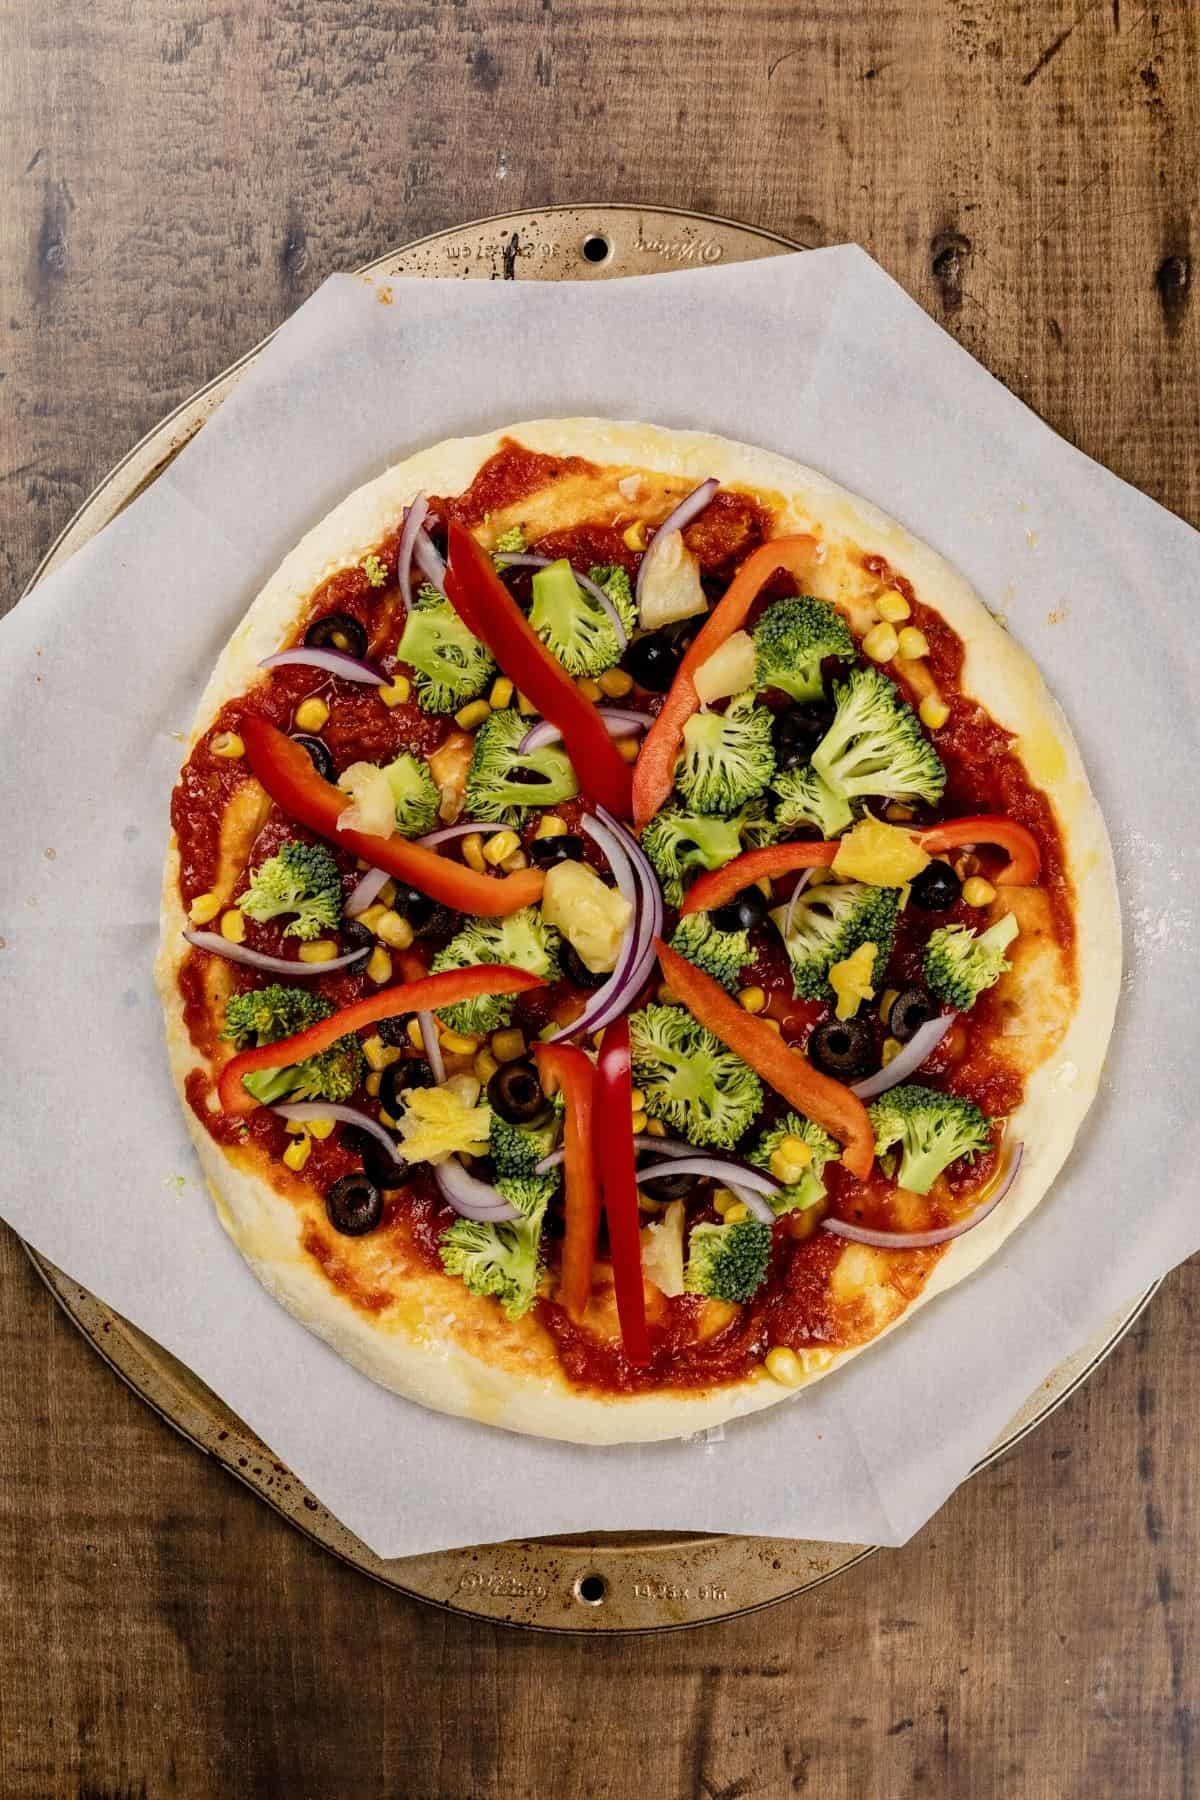 A broccoli and red pepper vegan pizza before baking on a metal pizza tray.